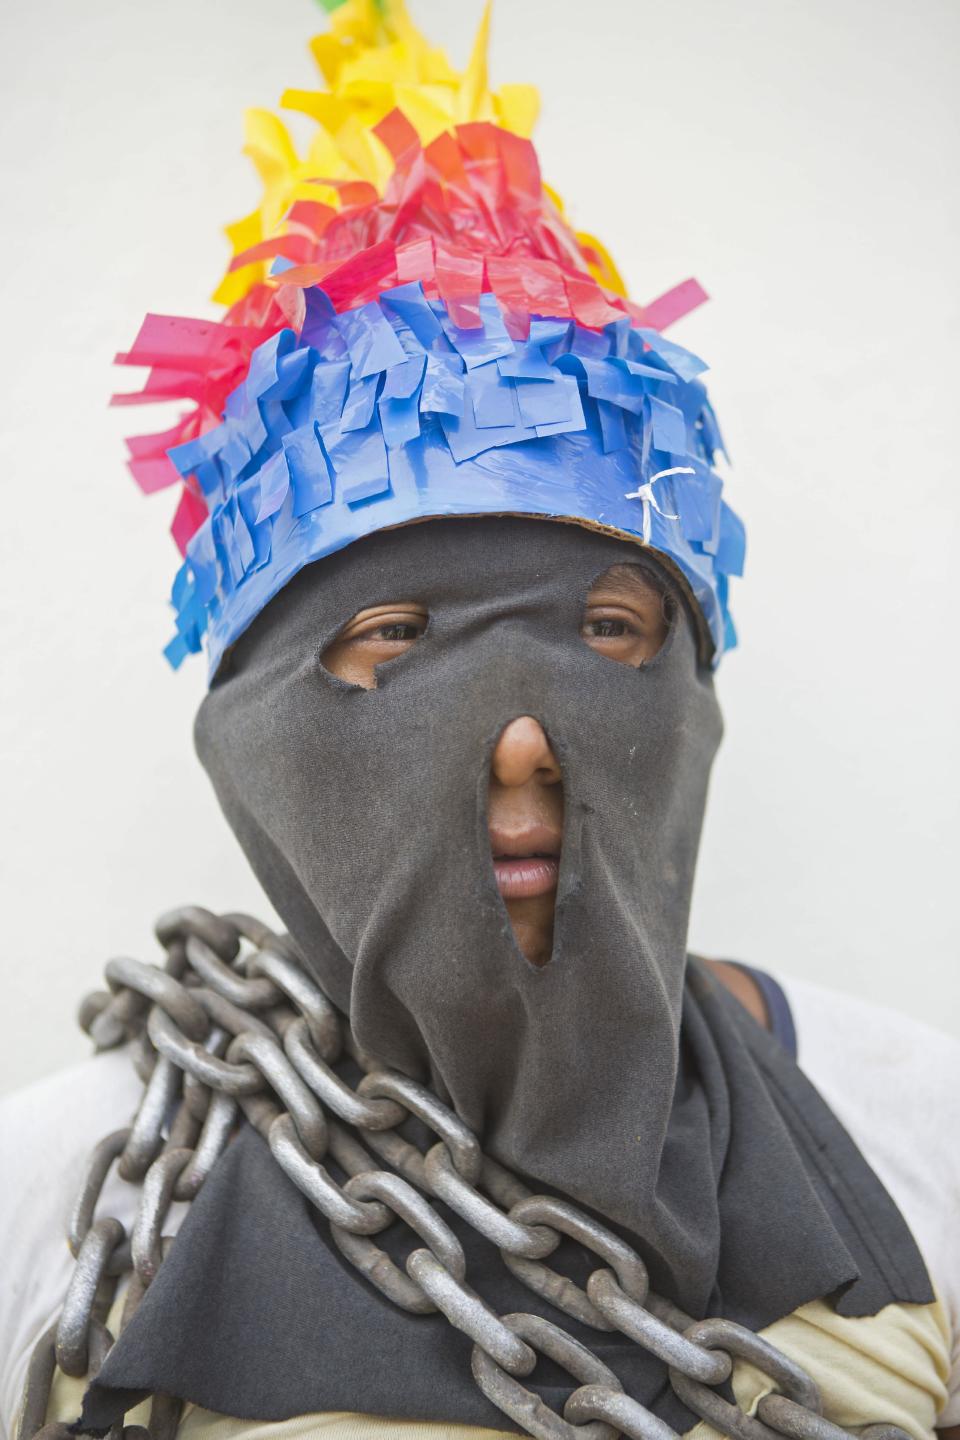 In this April 18, 2014 photo, a youth in a mask poses for a picture during a break while participating in "Los Encadenados," or The Chained Ones procession on Good Friday during Holy Week in Masatepe, Nicaragua. More than 900 people participated in the event this year, some to keep the tradition alive and others to repay a promise to God. (AP Photo/Esteban Felix)